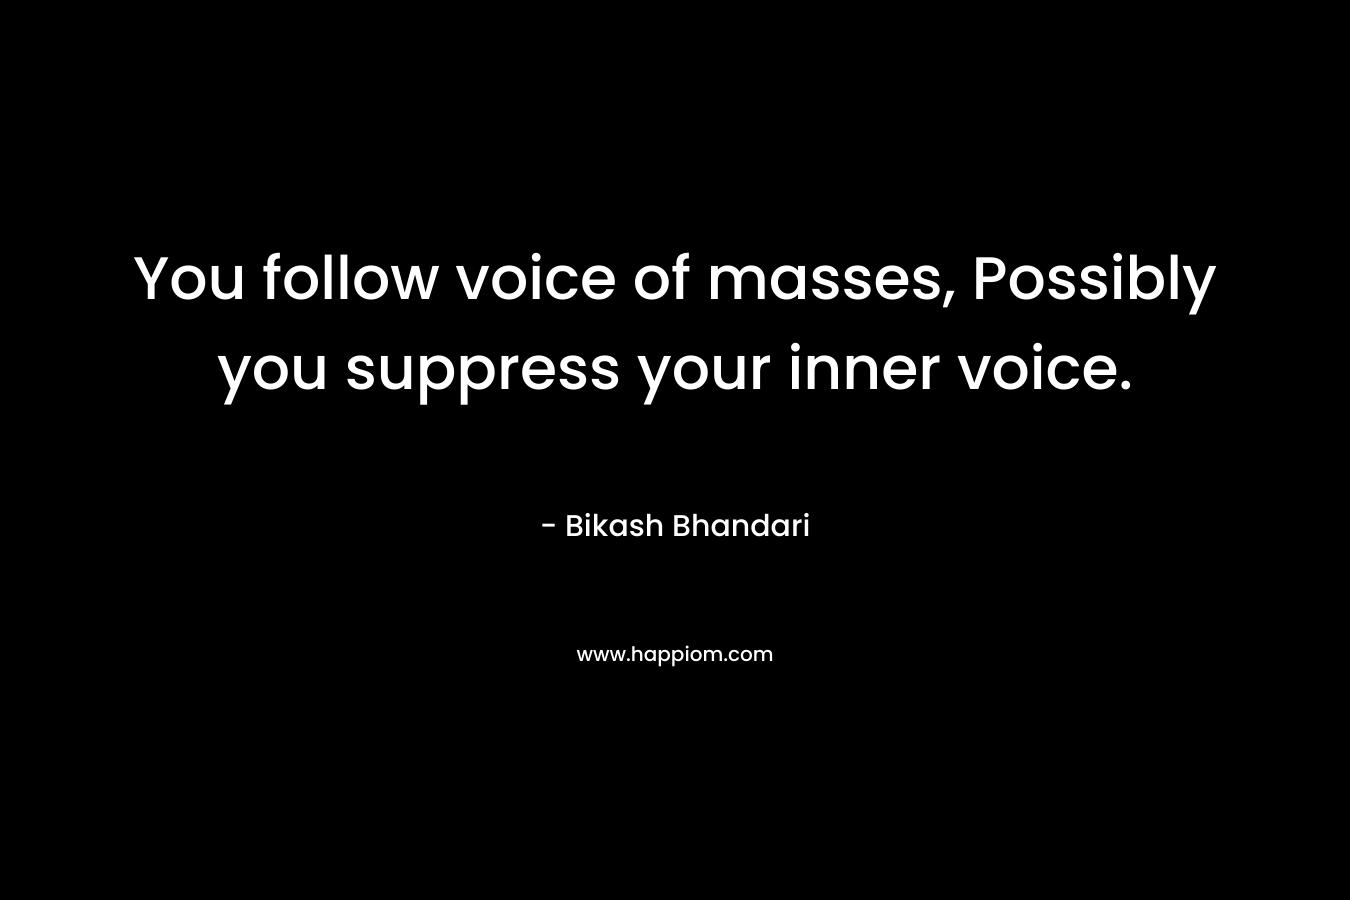 You follow voice of masses, Possibly you suppress your inner voice.